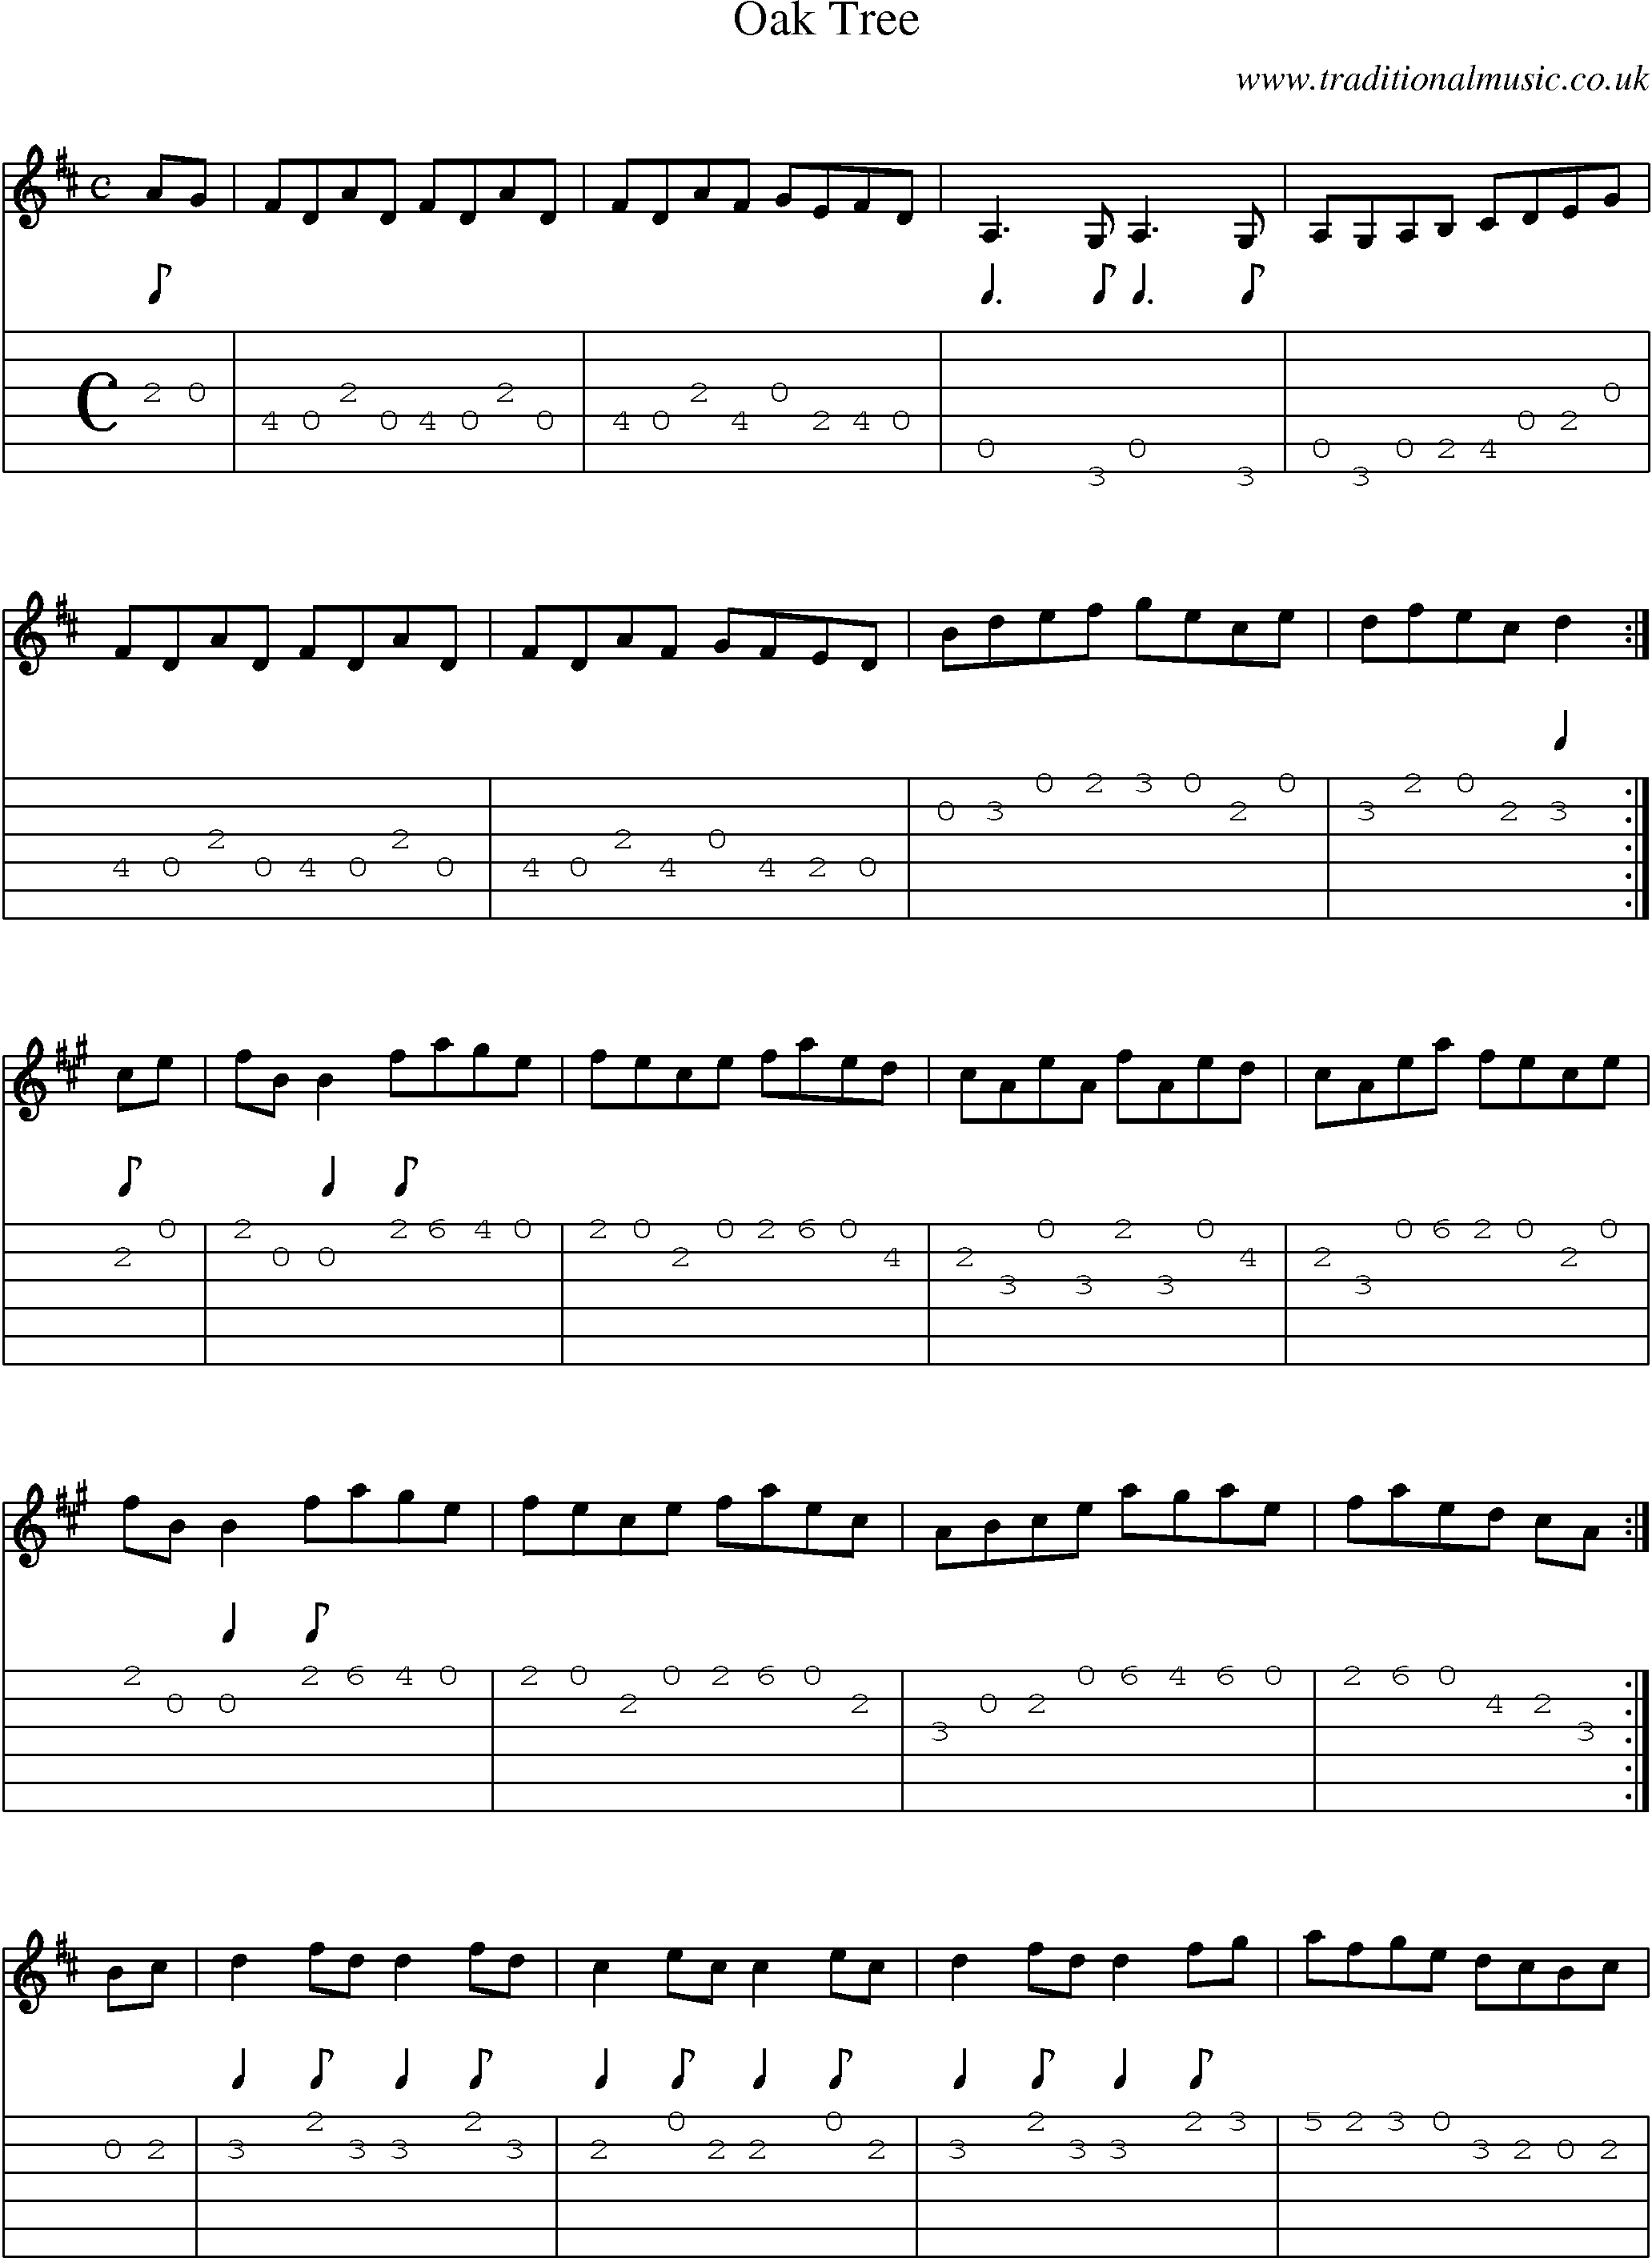 Music Score and Guitar Tabs for Oak Tree